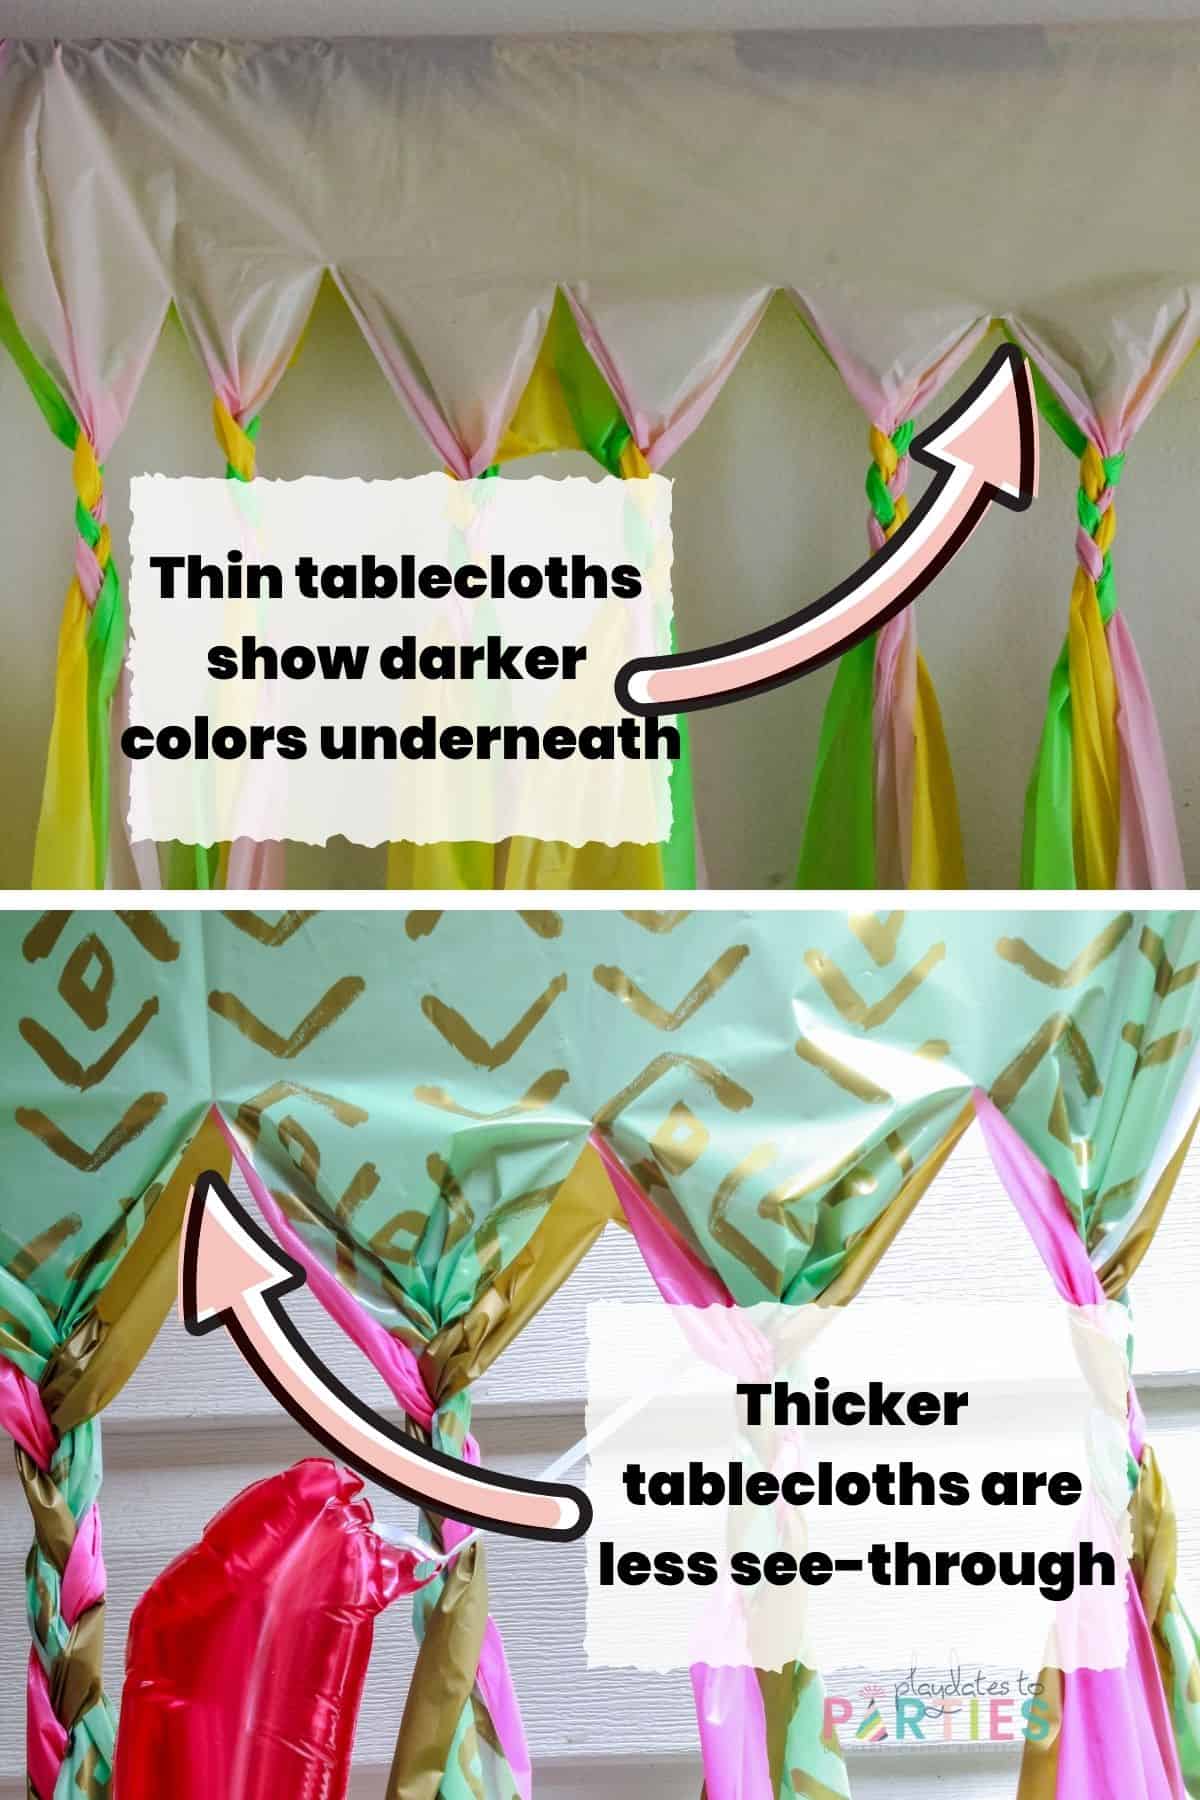 collage showing how cheaper plastic tablecloths in light colors are thinner and more see-through than thicker plastic tablecloths in saturated colors